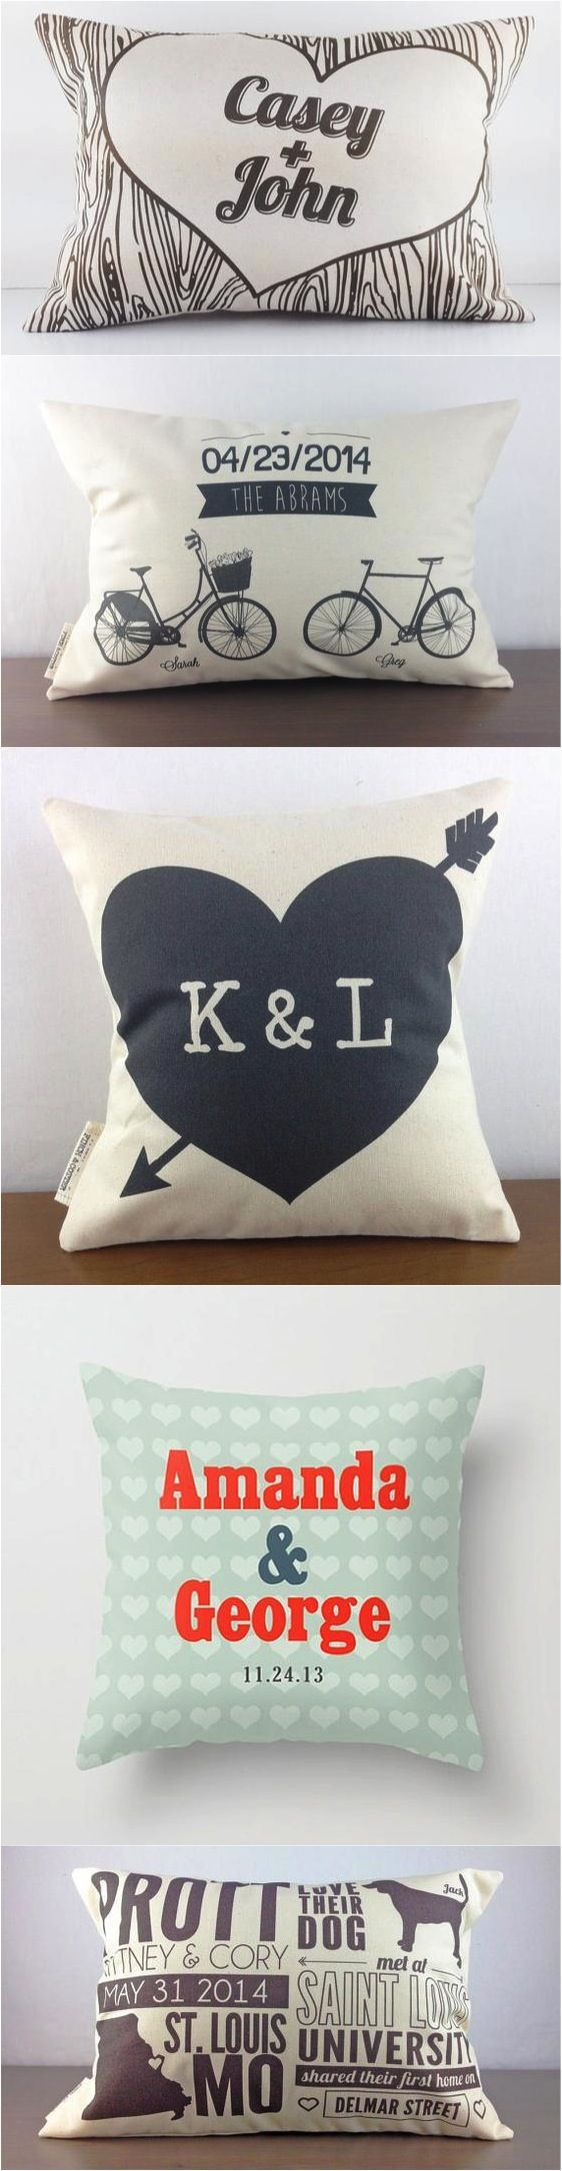 Wedding Gift Ideas For Couples Living Together
 What a sweet t for a couples first housewarming party